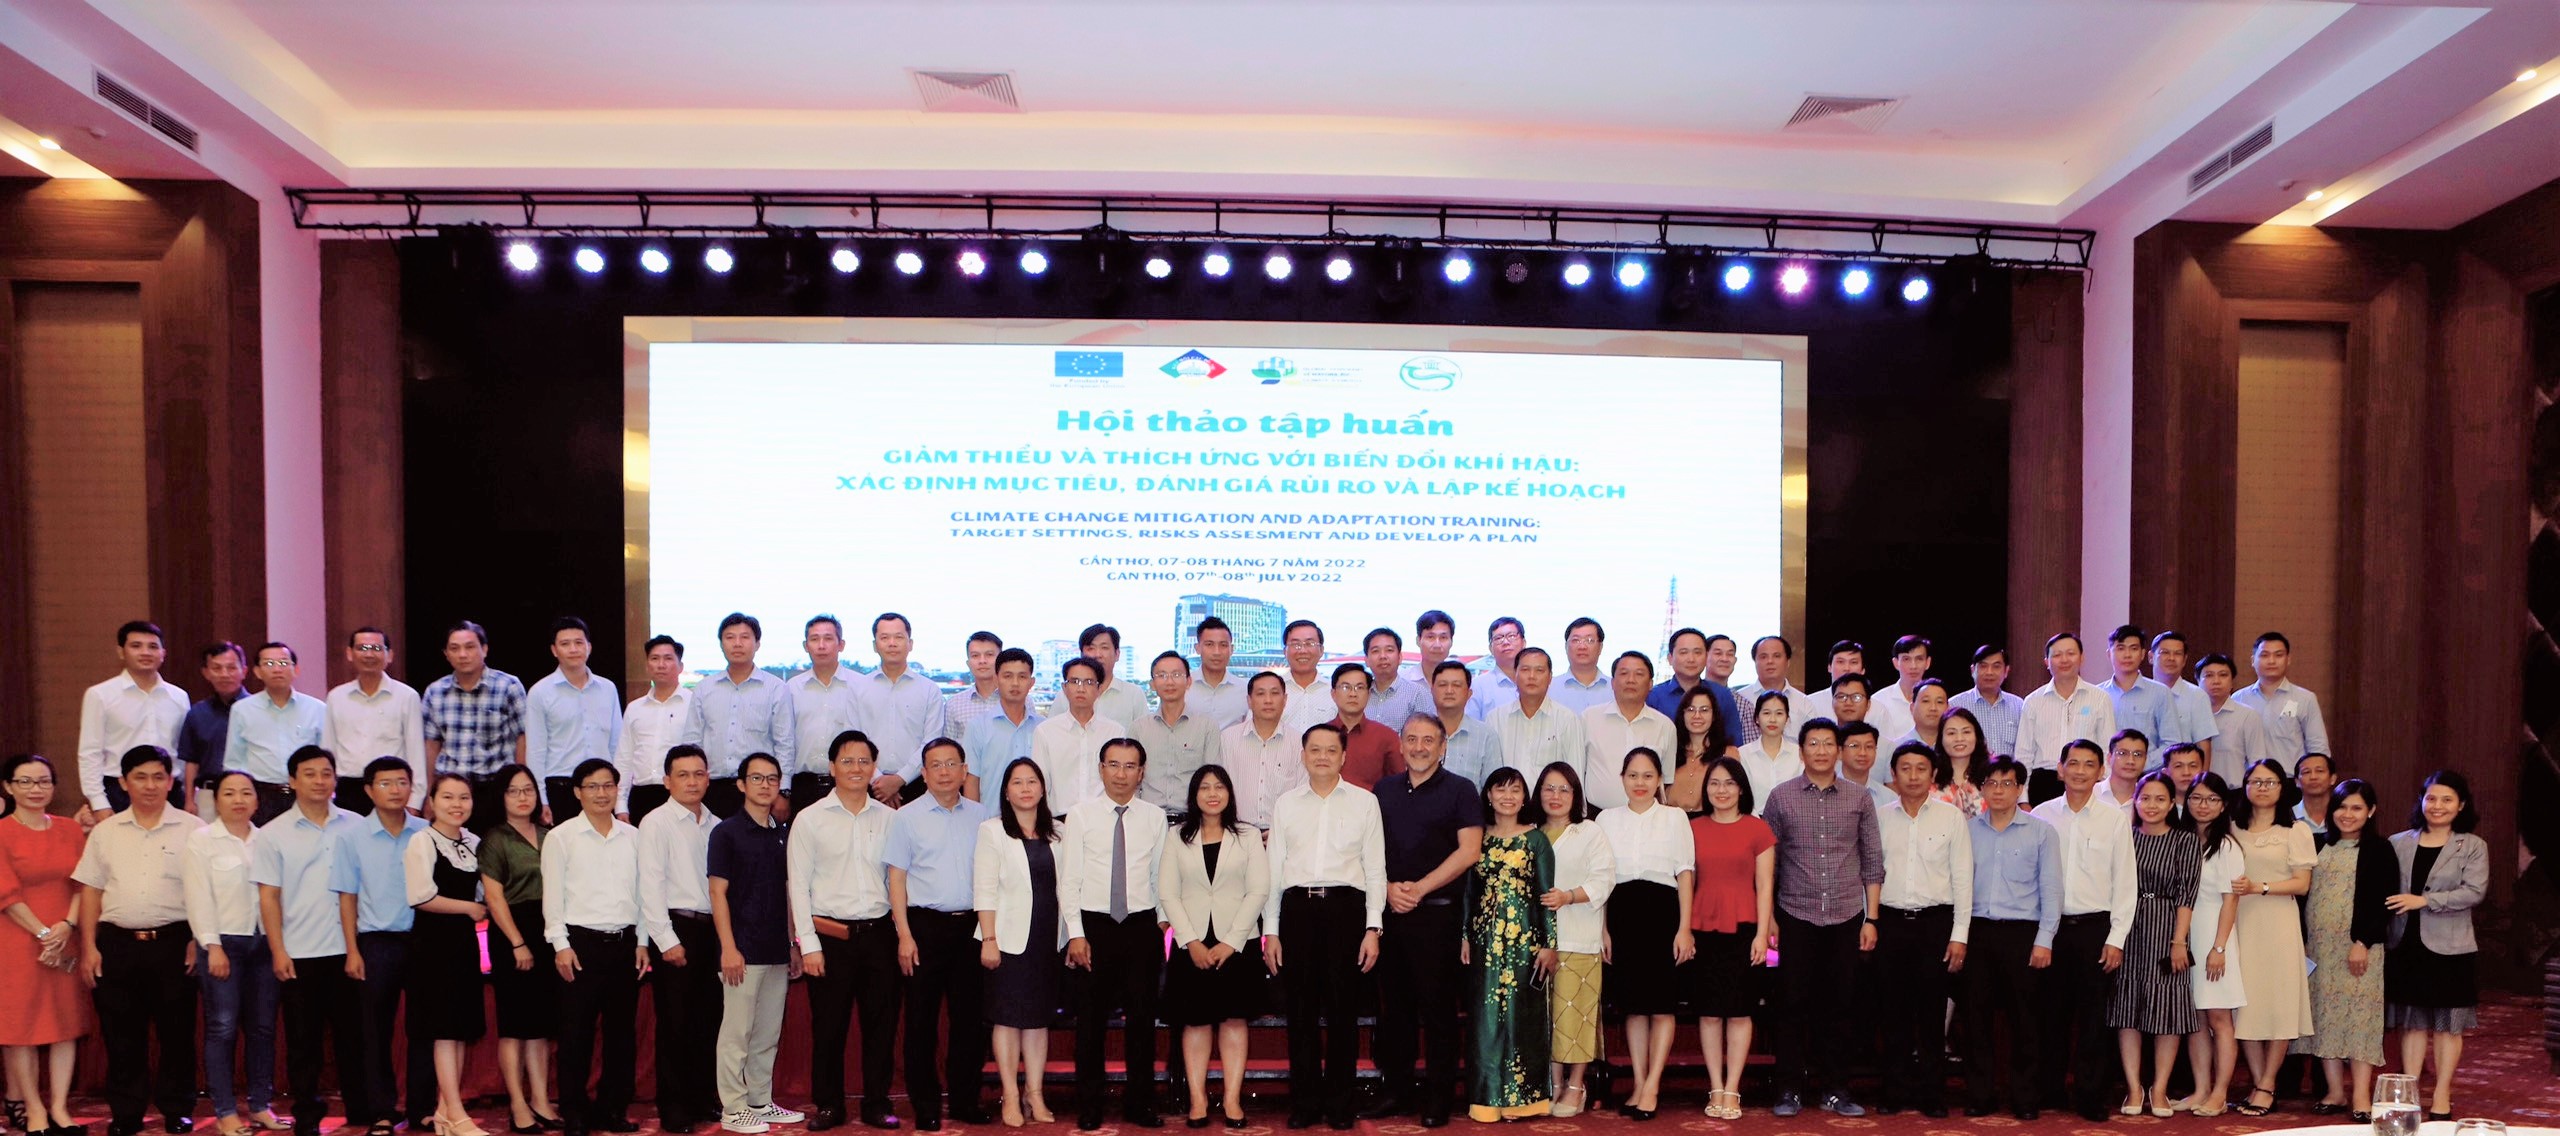 Vietnam | GCoM National Workshop on Climate Change in Can Tho, Vietnam